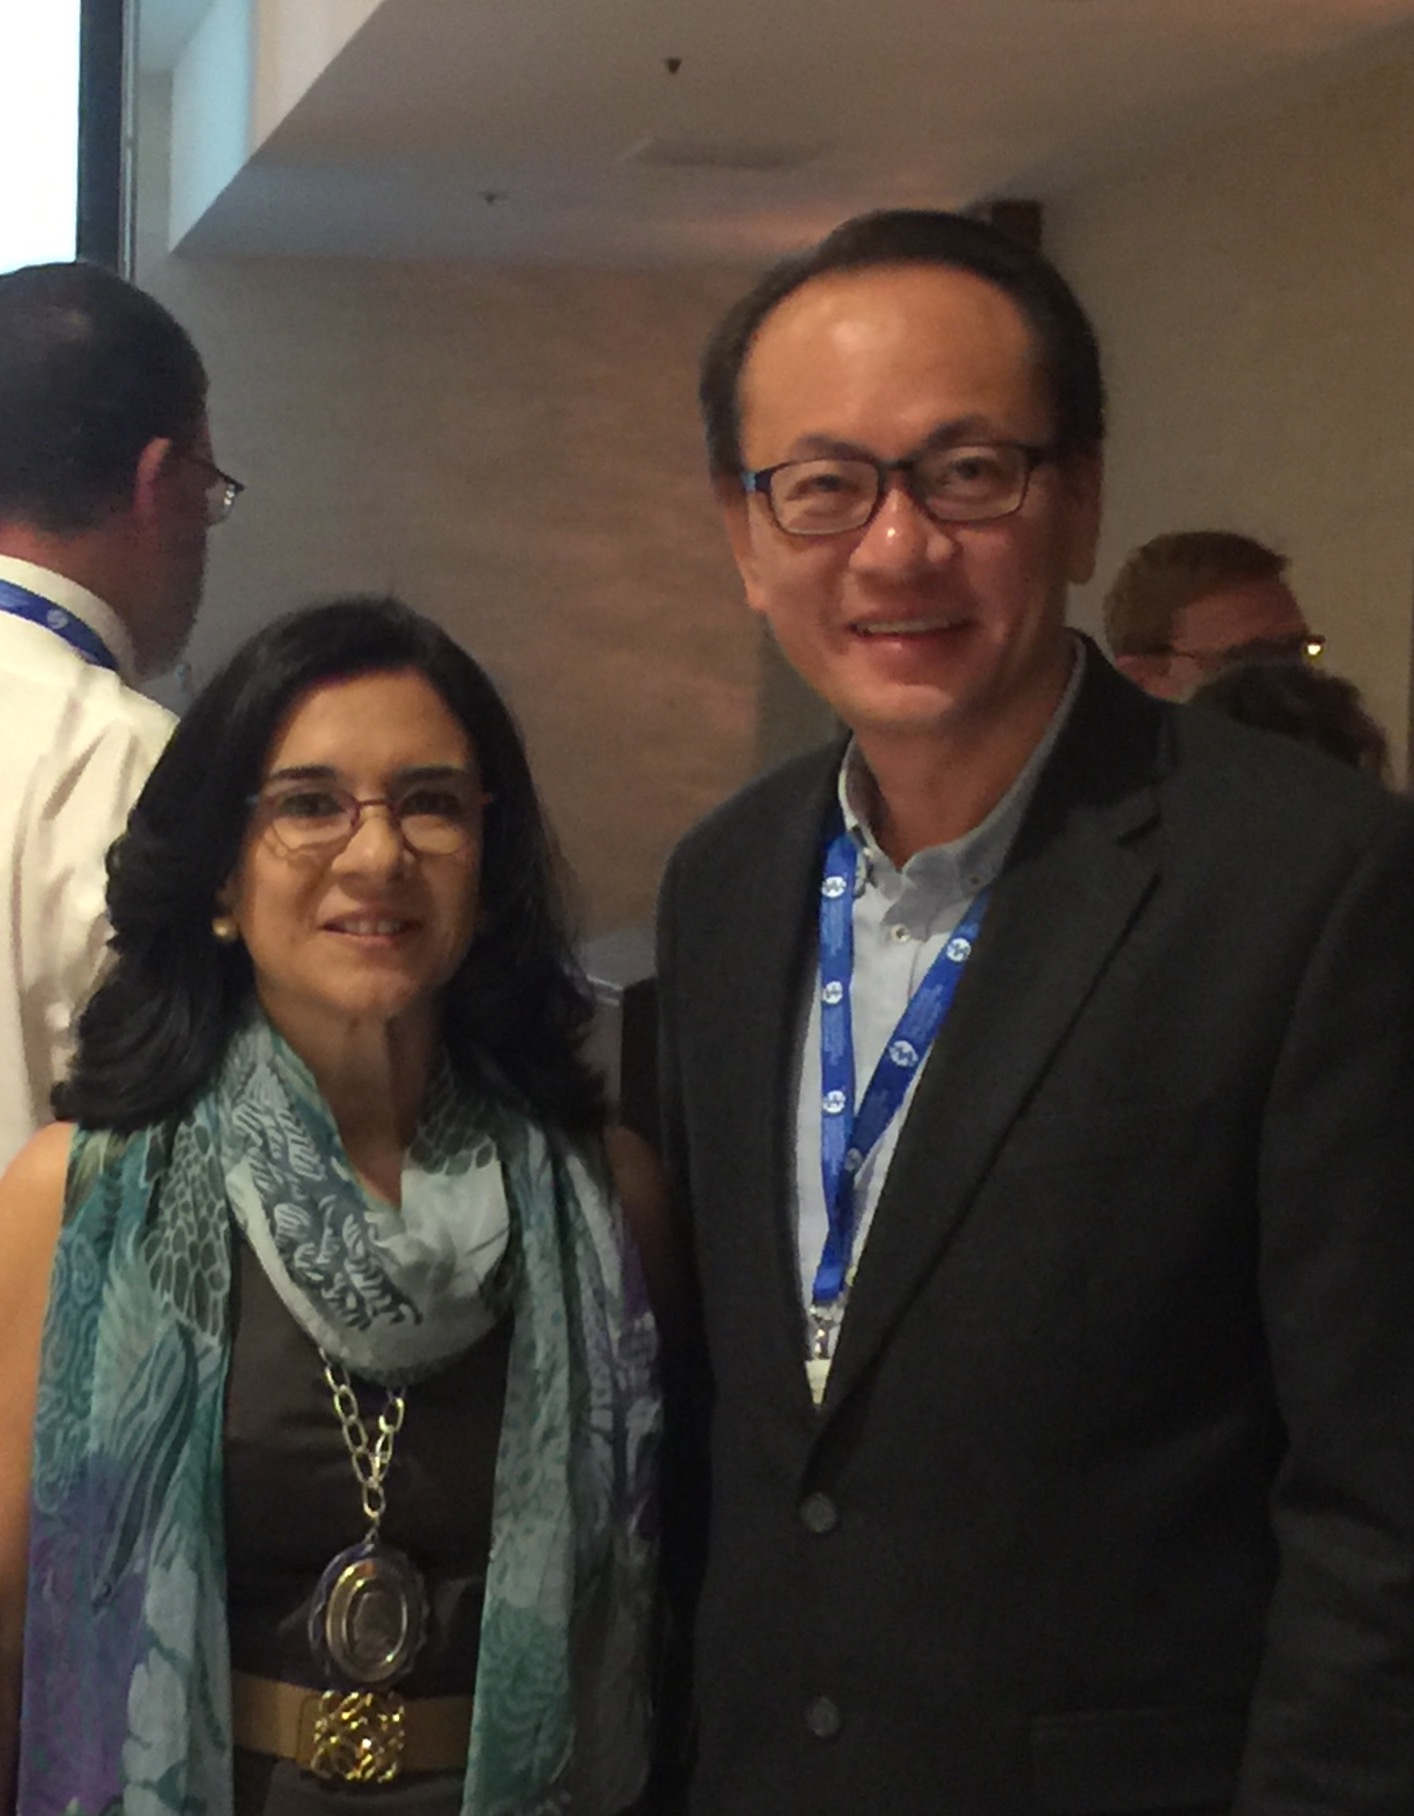 With Prof Maria Oquendo, President of American Psychiatric Association